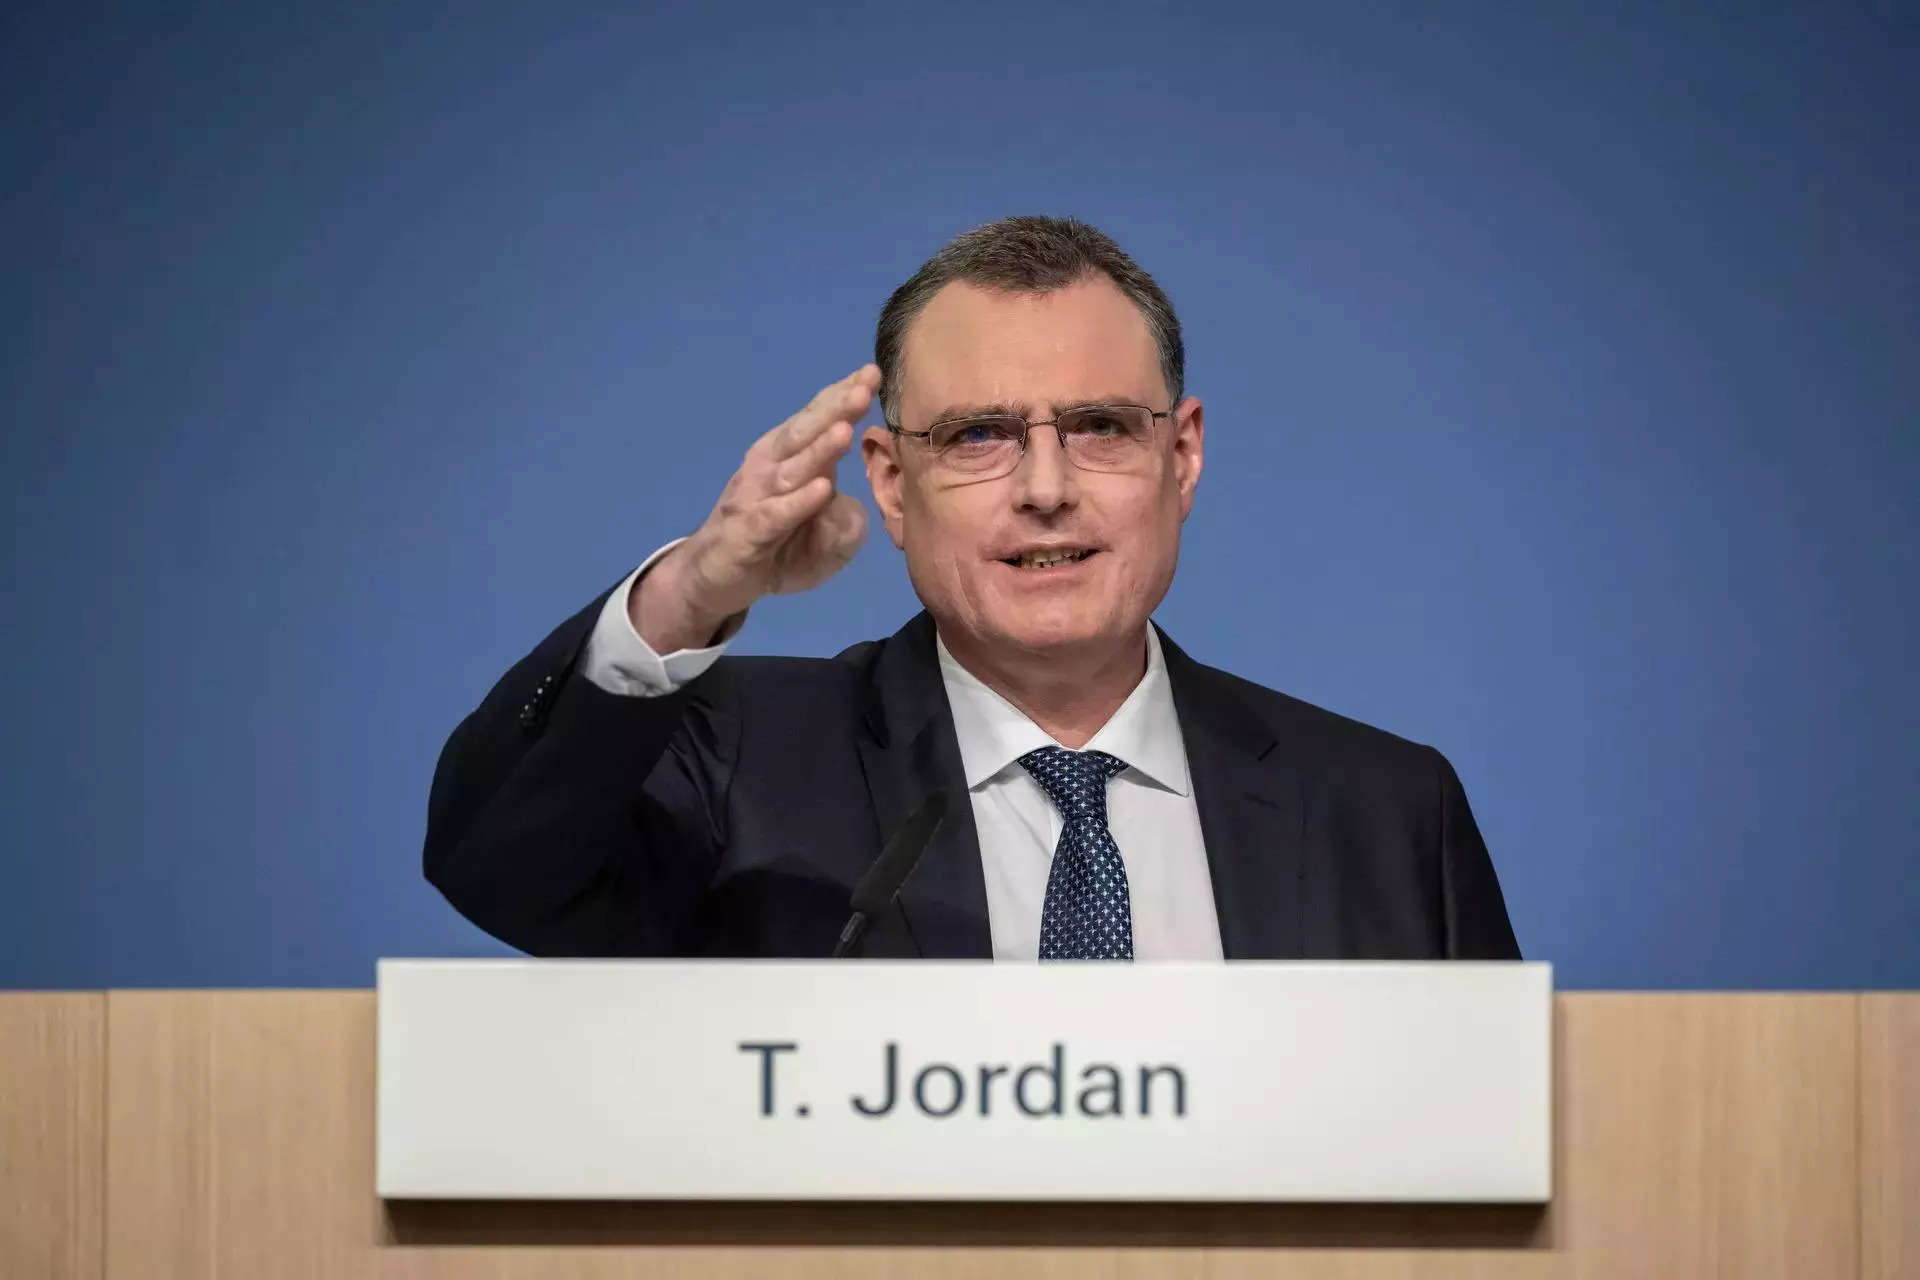 Thomas Jordan, head of Switzerland’s central bank, to step down after 12 years